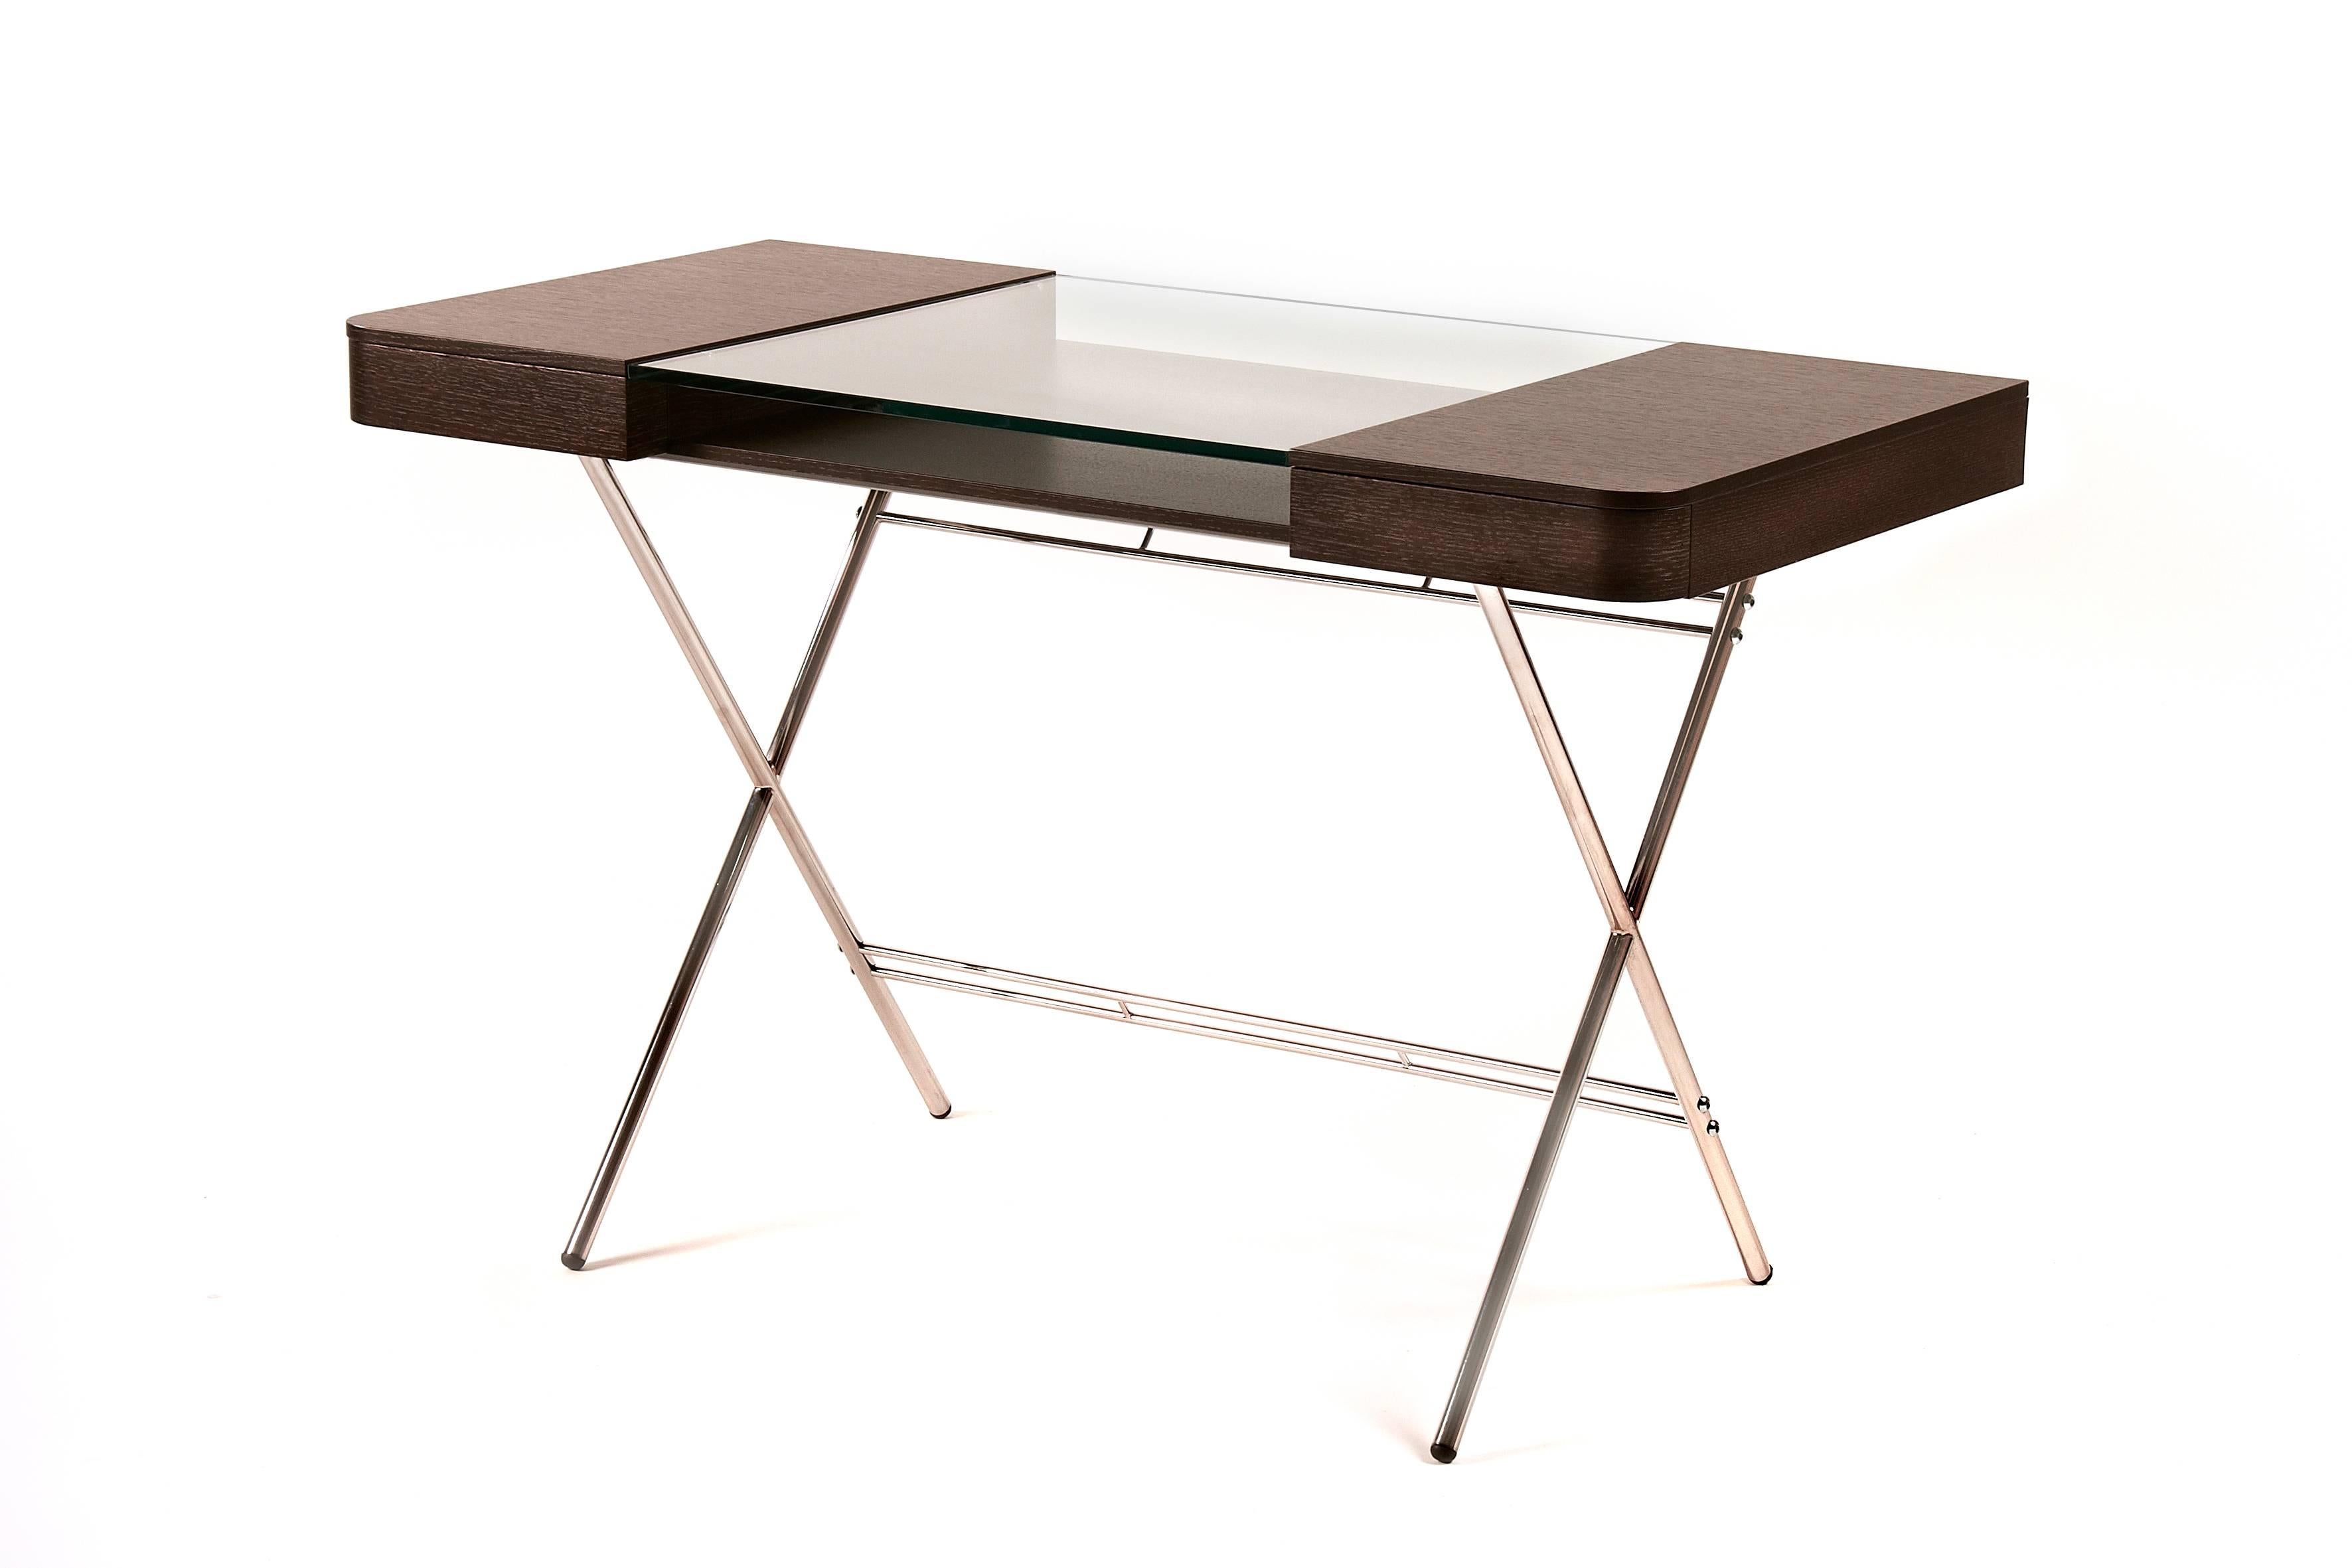 Cosimo desk was designed by the architect Marco Zanuso Jr for luxury French furniture brand, Adentro Paris. Ideal for a contemporary home office space, Cosimo desk comes in various finishes.
The desk is composed of a central glass panel with a